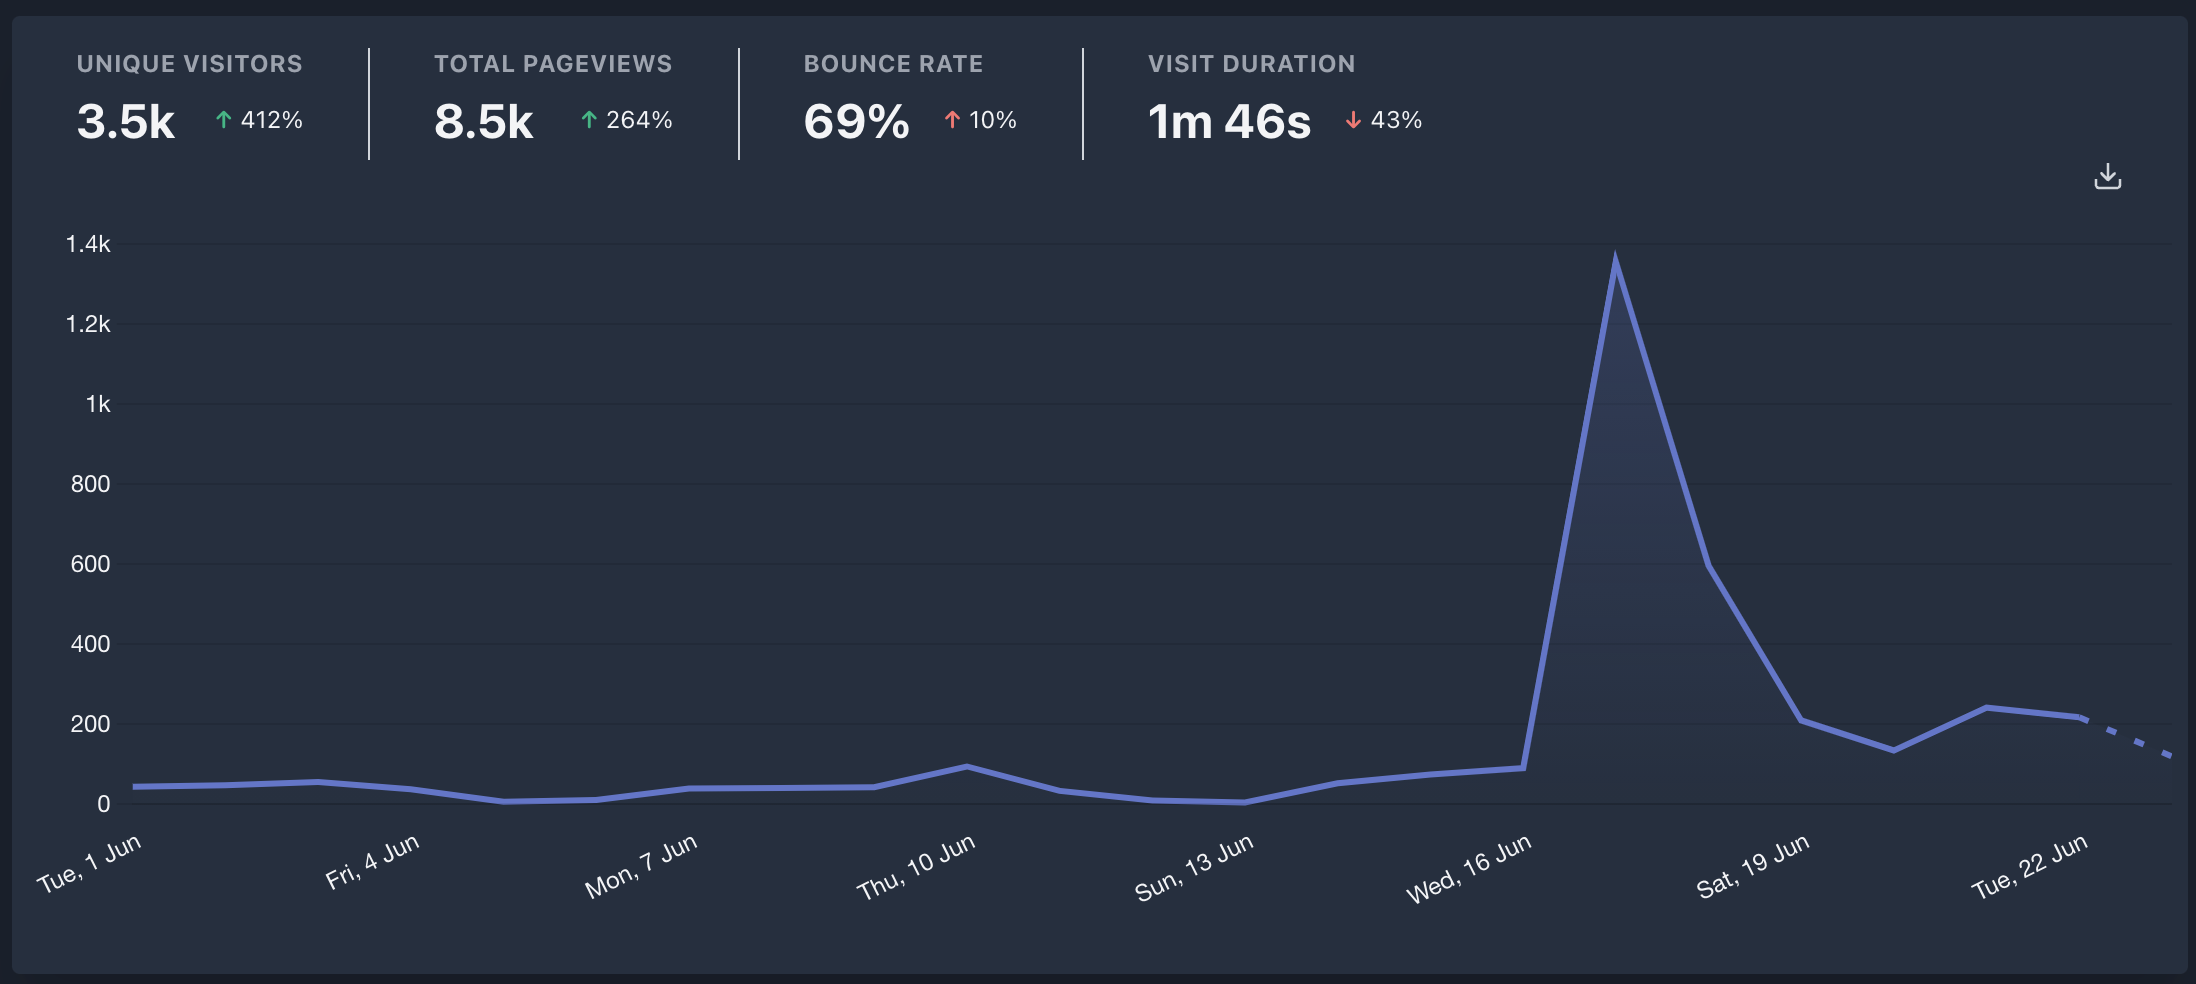 Image showing a 412% increase in unique visitors to the Trustpage site. 